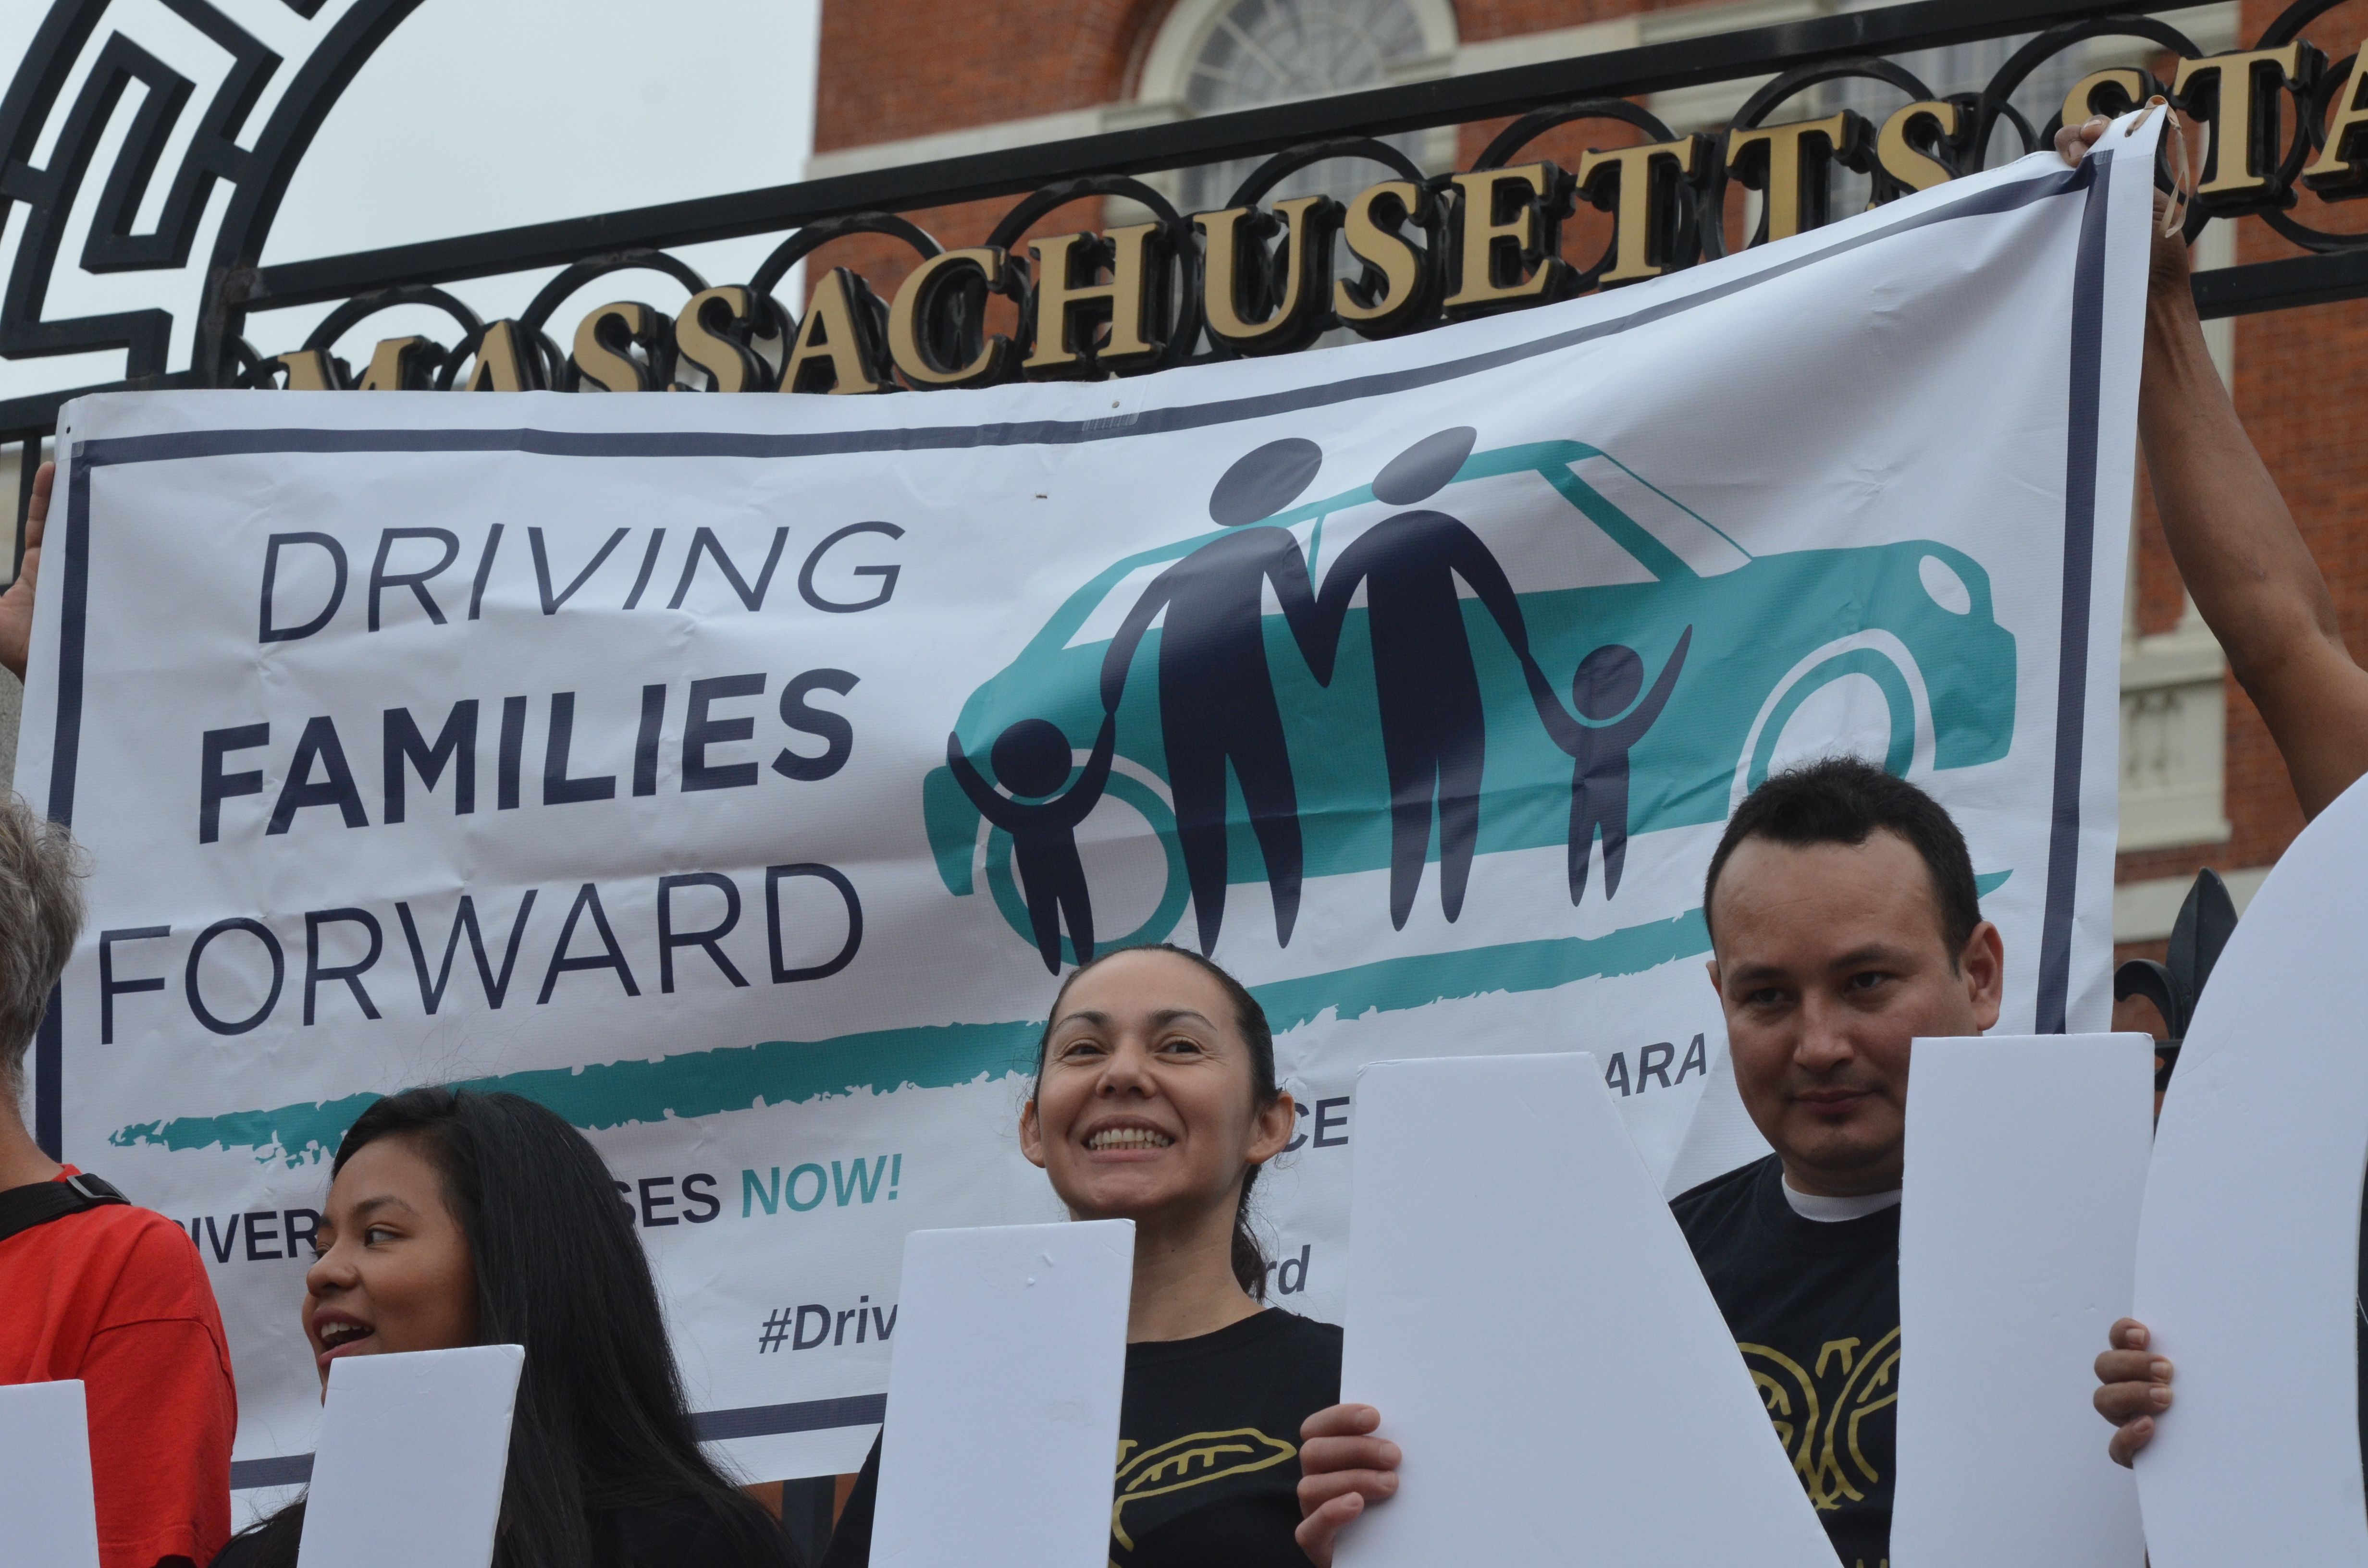 Undocumented immigrants can get Mass. drivers' licenses in July 2023 -  CommonWealth Beacon